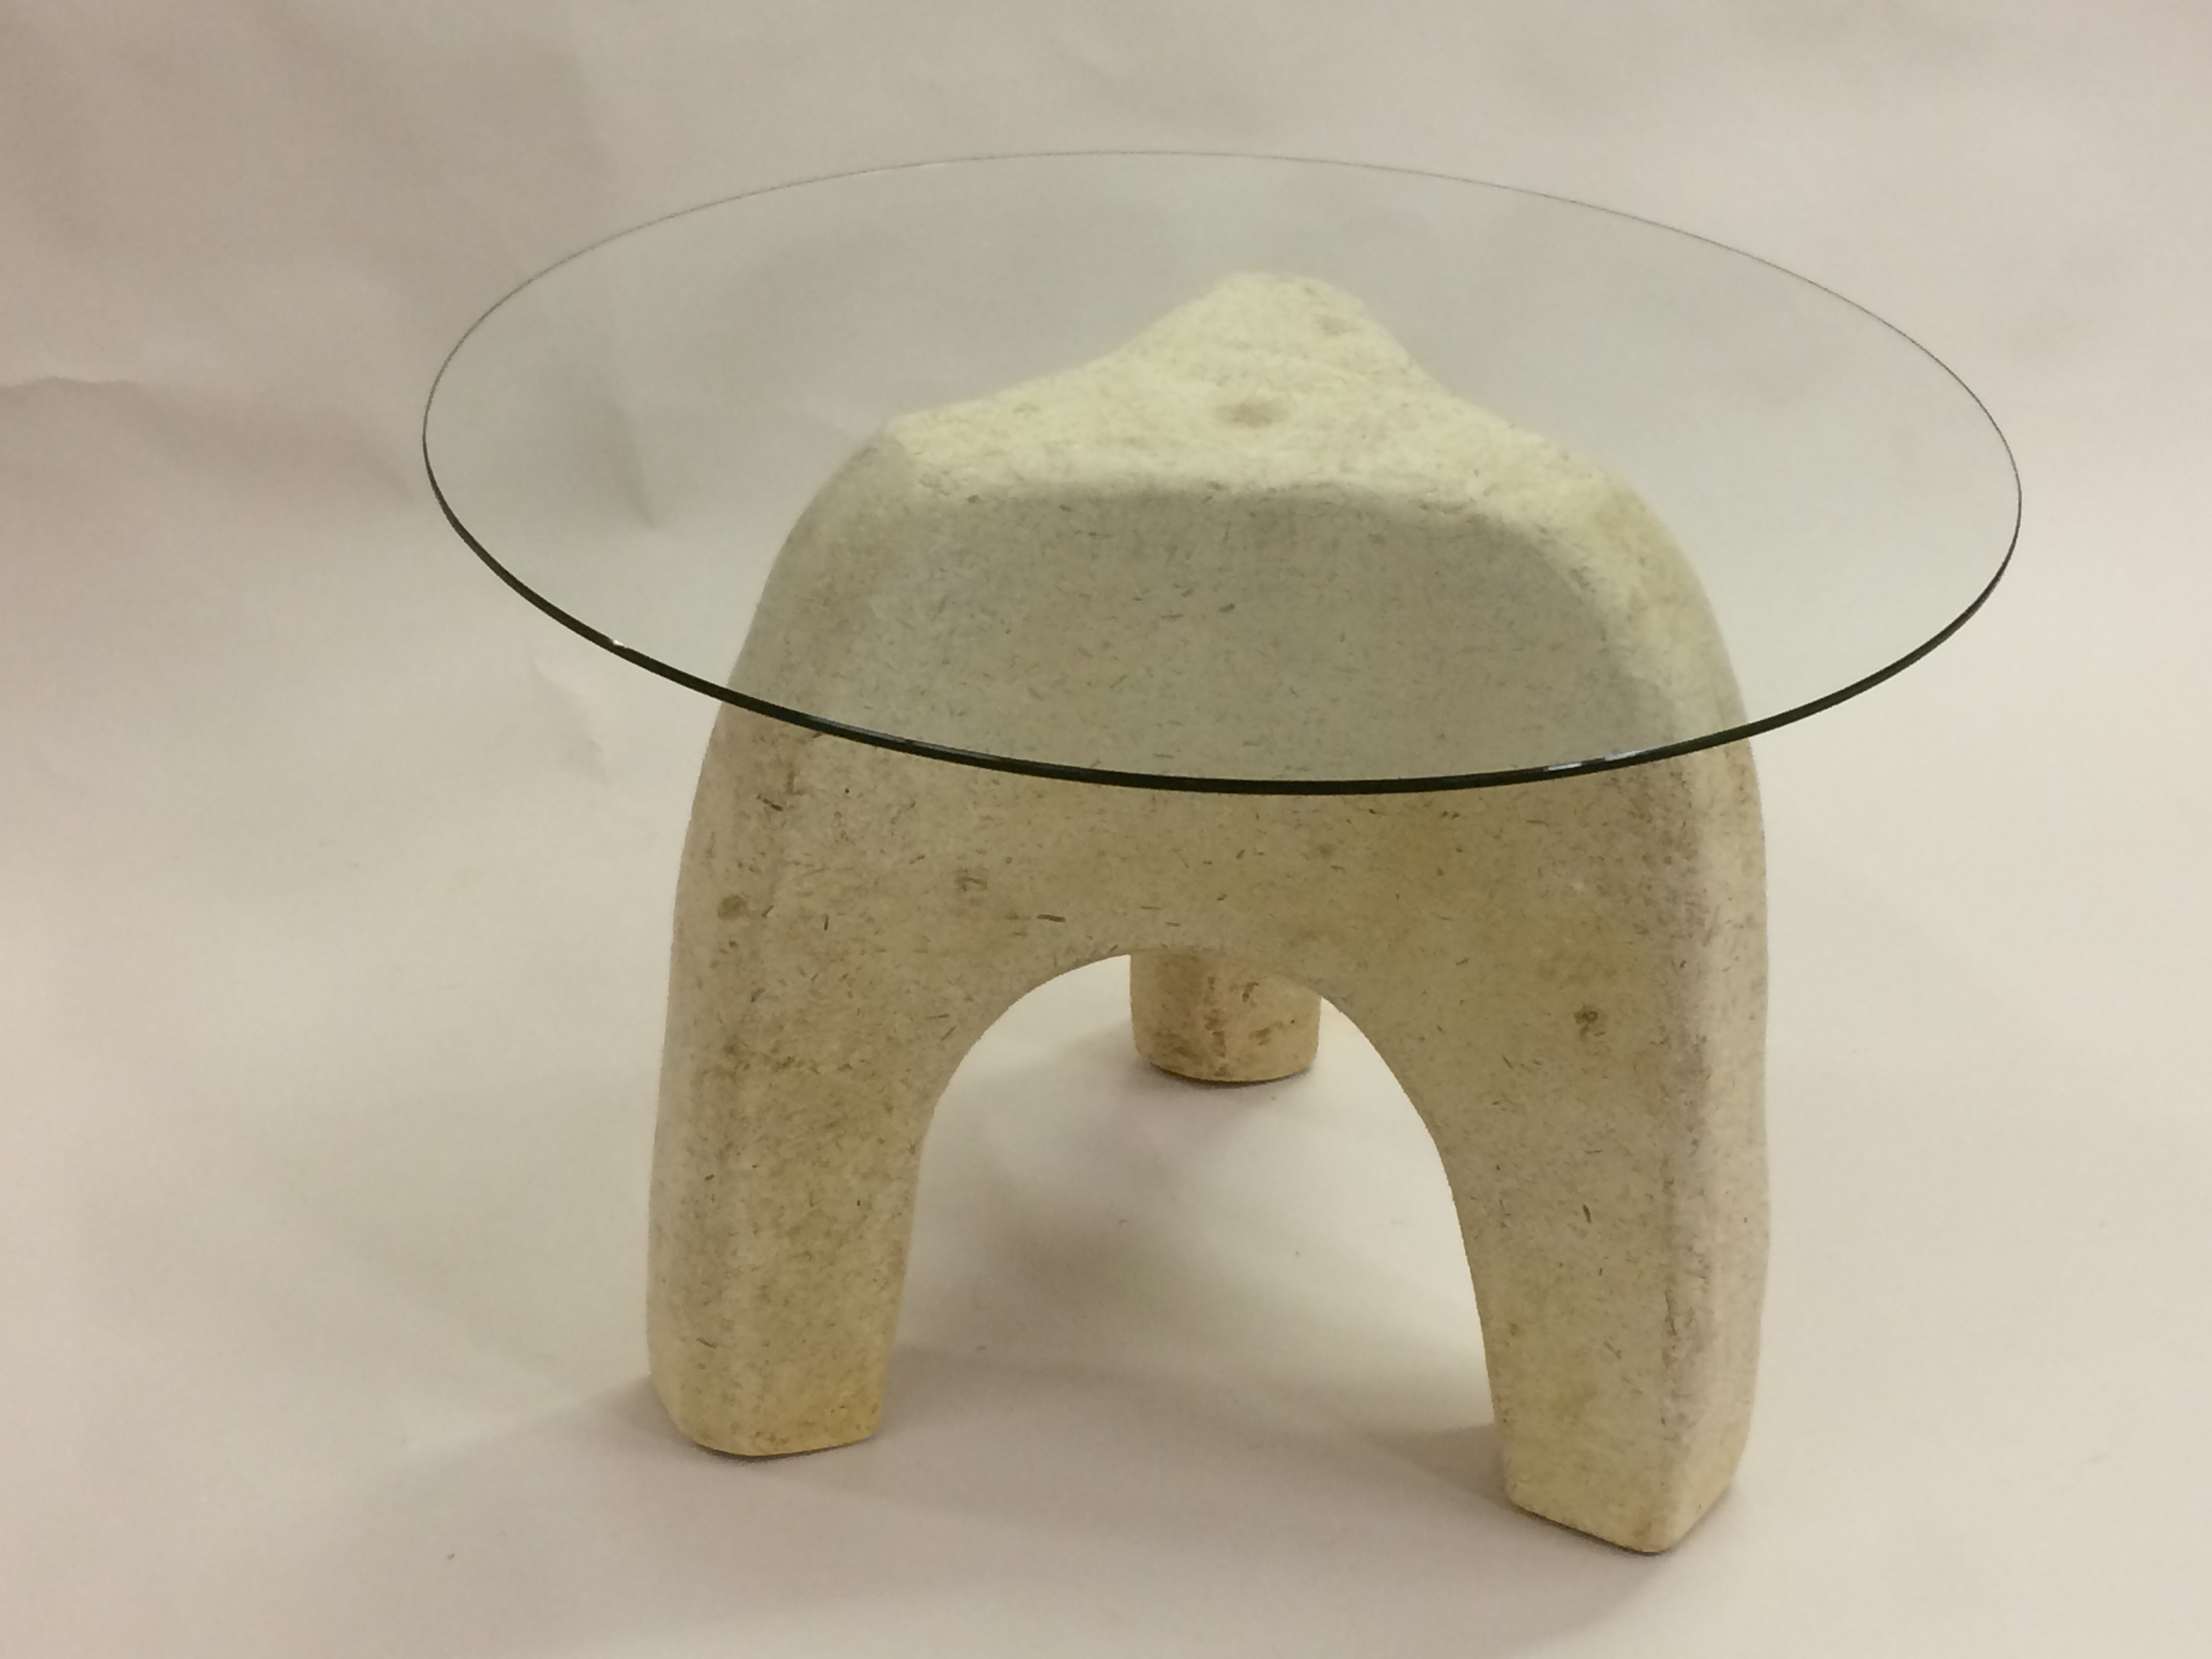 A coffee table made from hemp and mycelium by Tom Sippel
